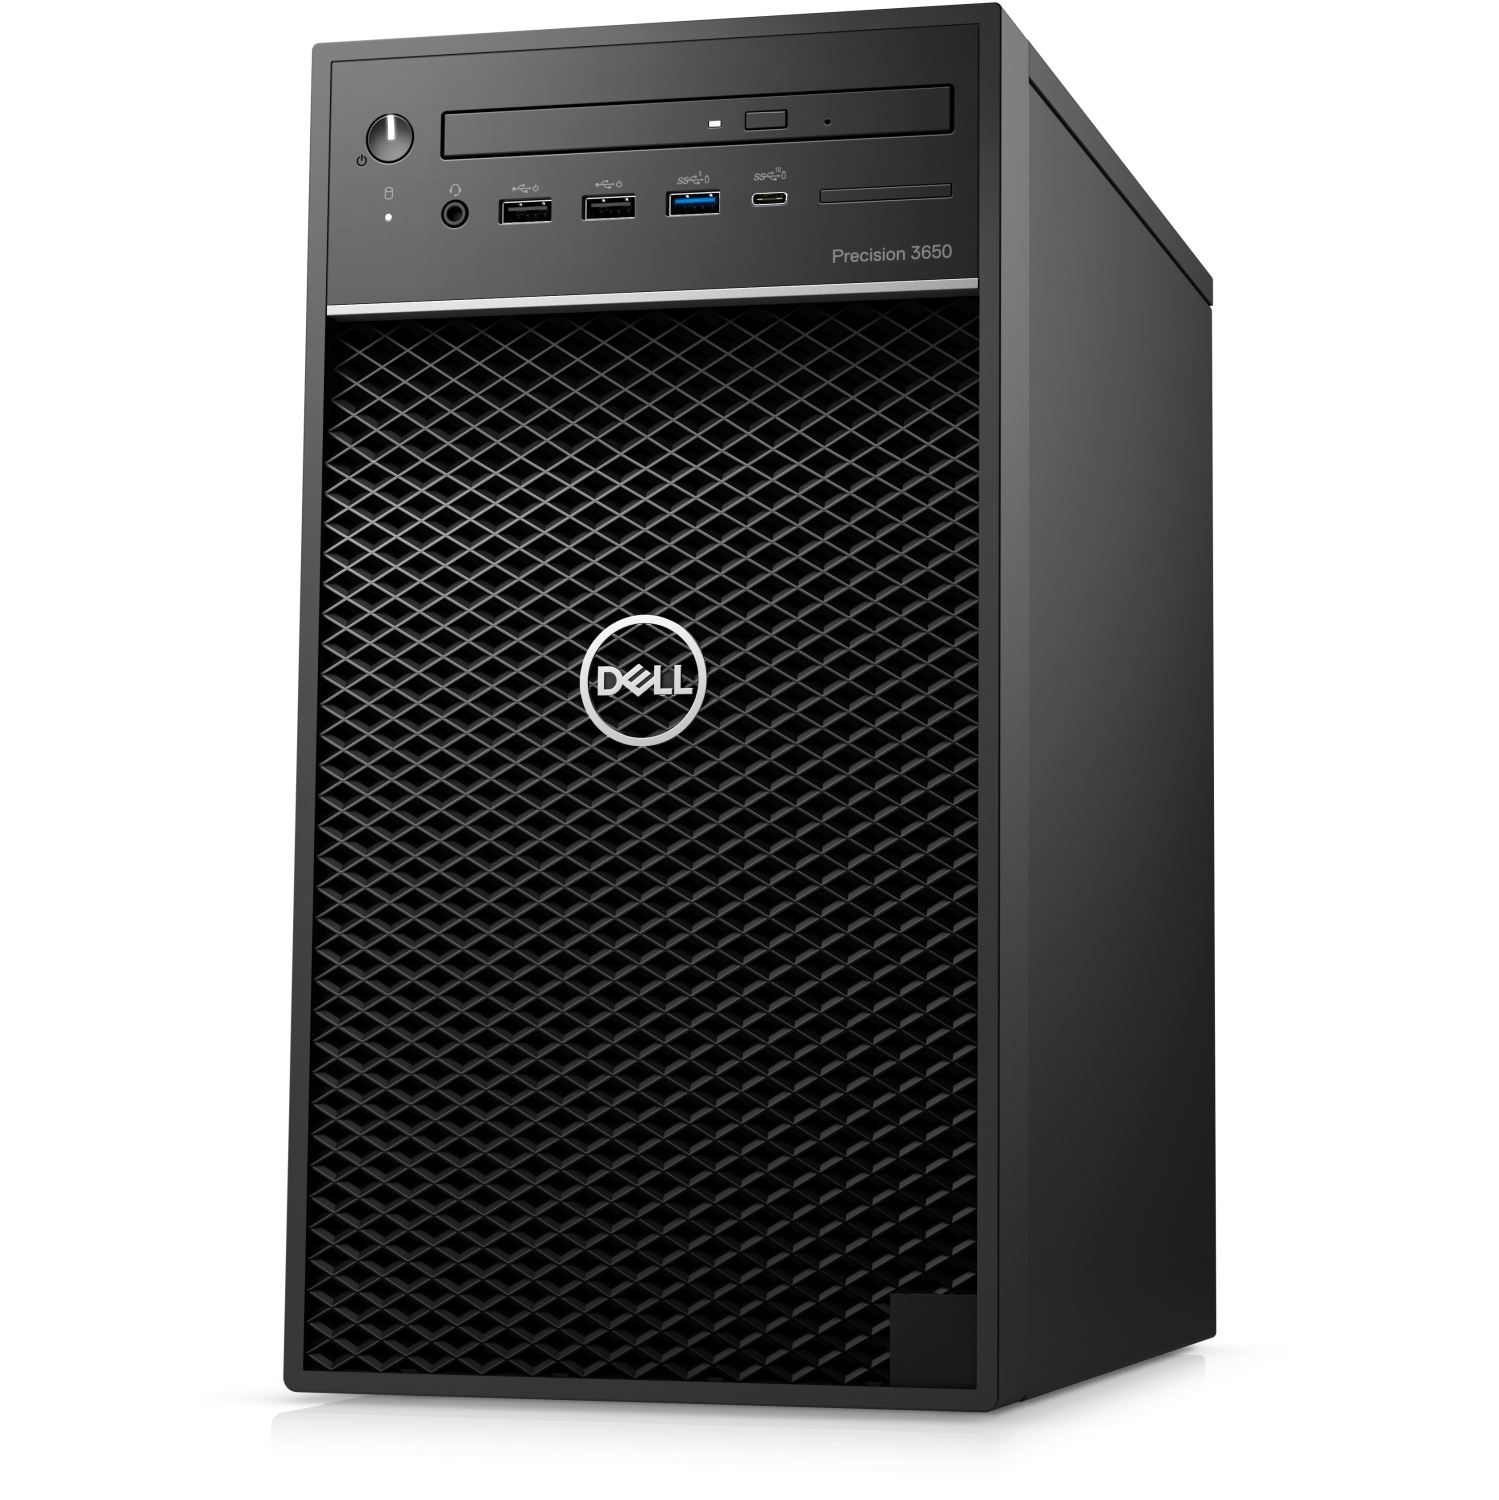 Refurbished (Excellent) - Dell Precision T3650 Workstation Desktop (2021), Core i7 - 1TB SSD - 32GB RAM - RTX 3070, 8 Cores @ 4.9 GHz - 11th Gen CPU Certified Refurbished